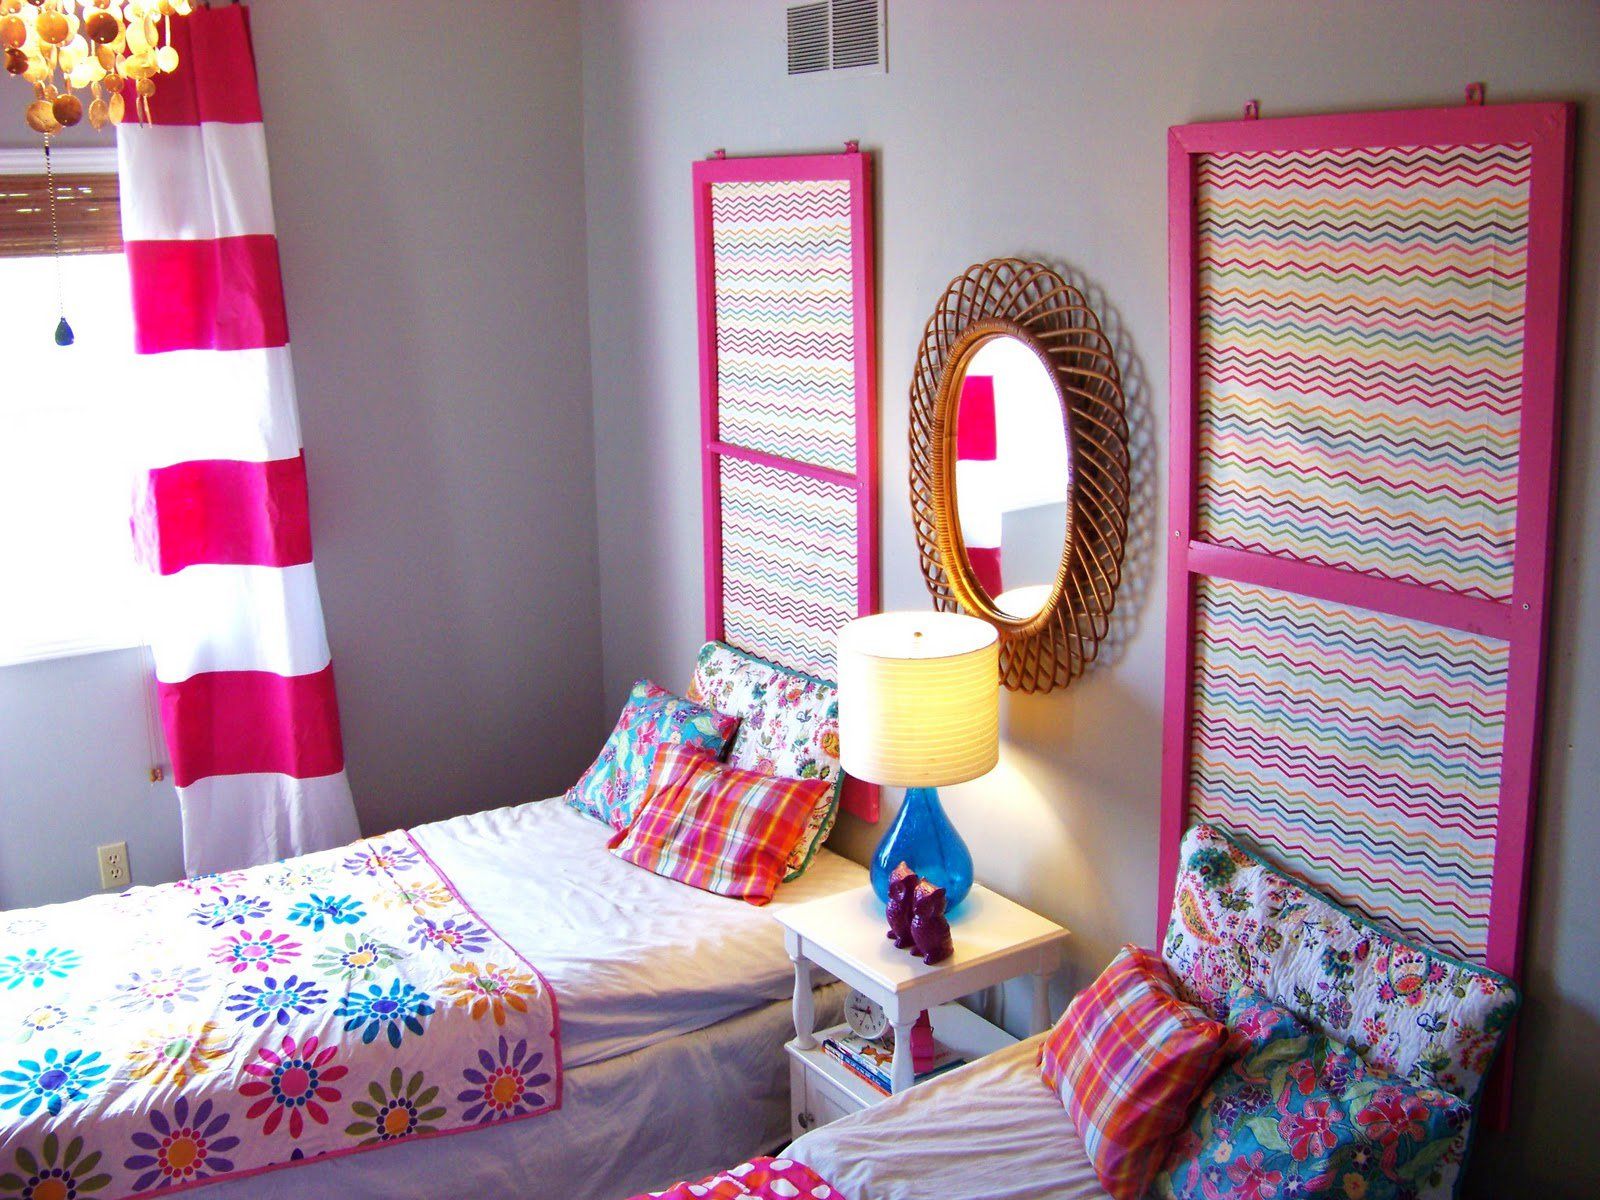 Lovely Headboard for Kids Room -   31 DIY Ideas How To Use Old Windows